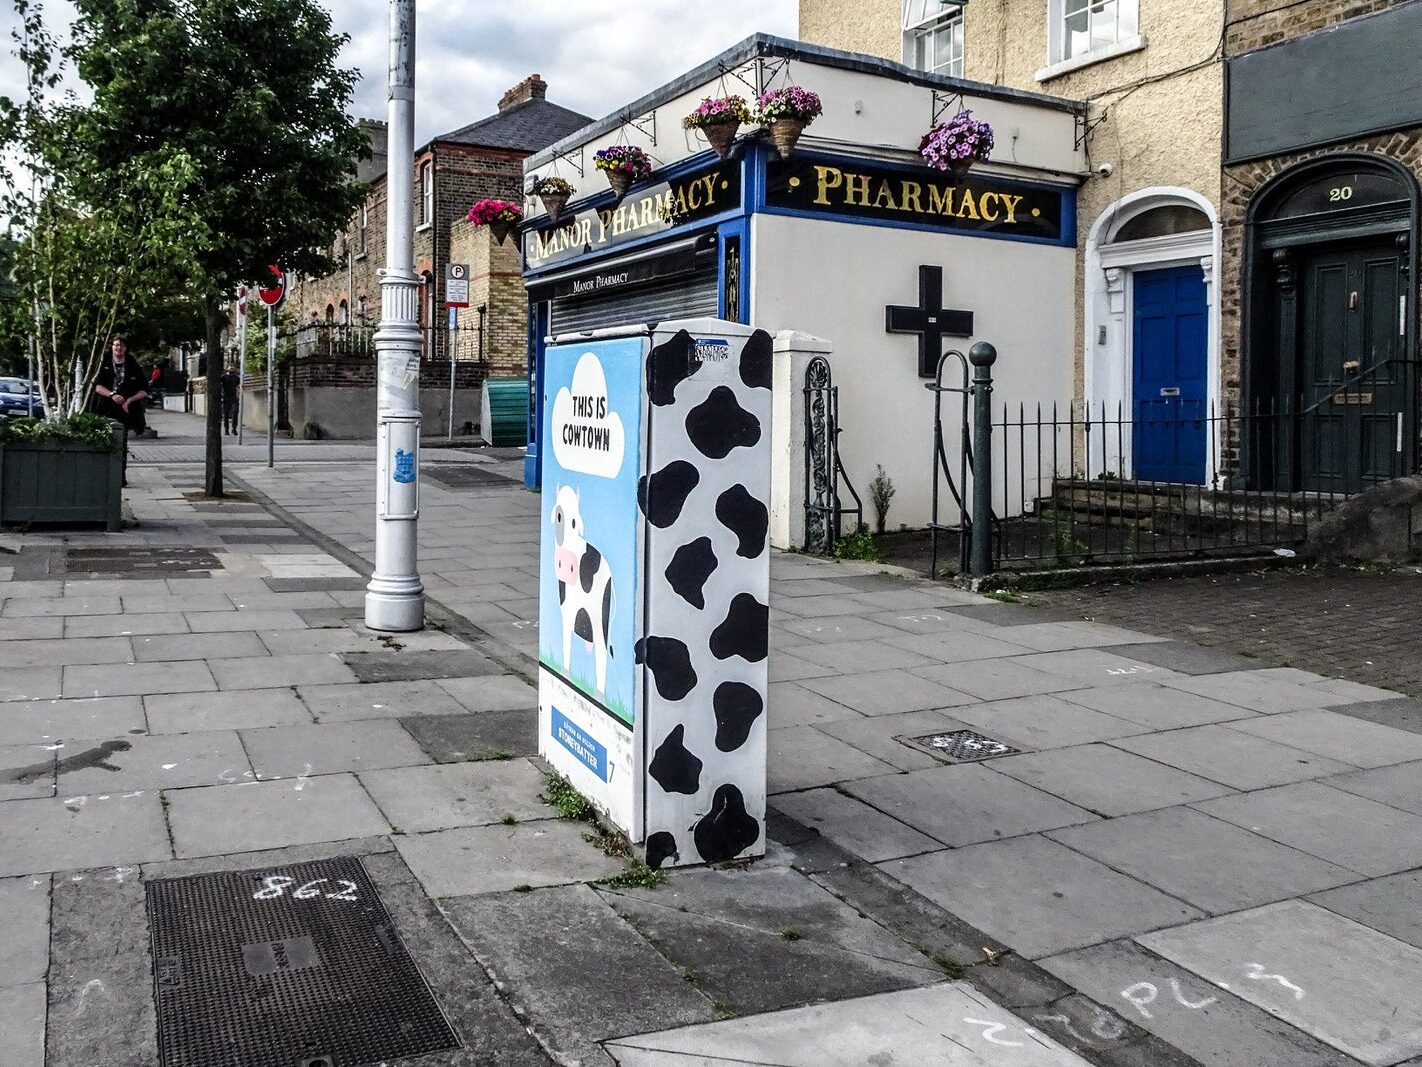 THIS IS COWTOWN [PAINT-A-BOX STREET ART ON MANOR STREET IN STONEYBATTER]-236727-1